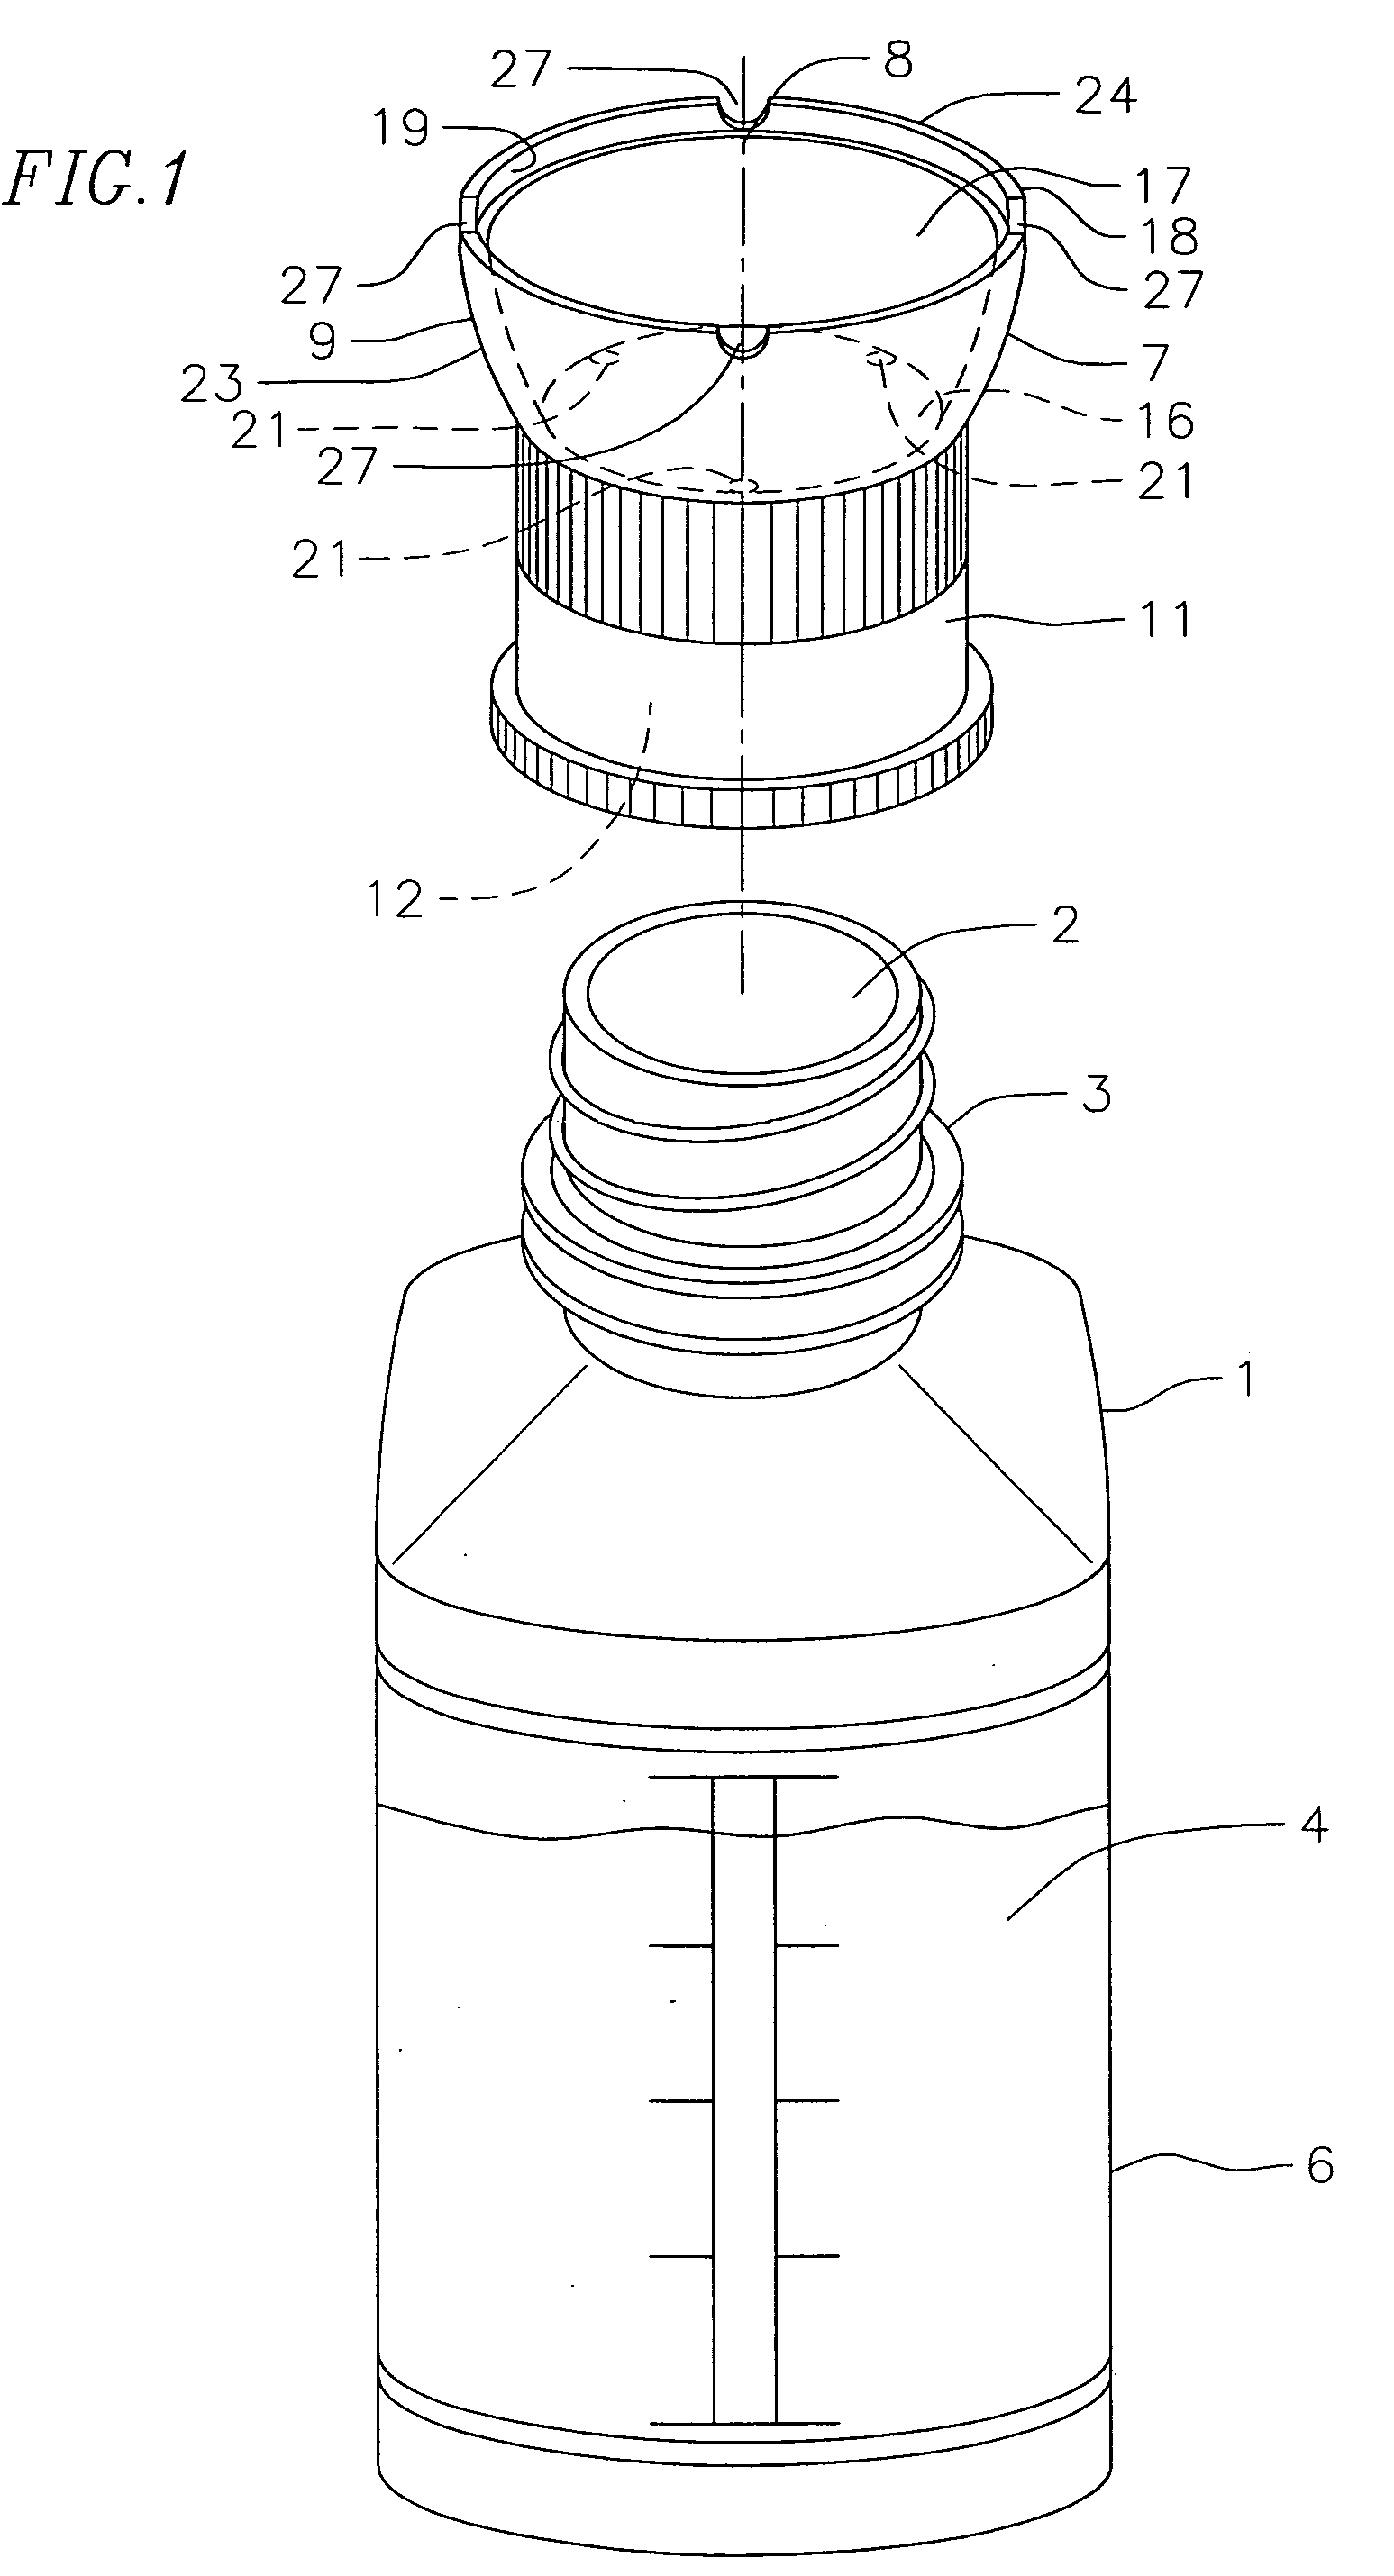 Device for irrigating and inspecting a wound